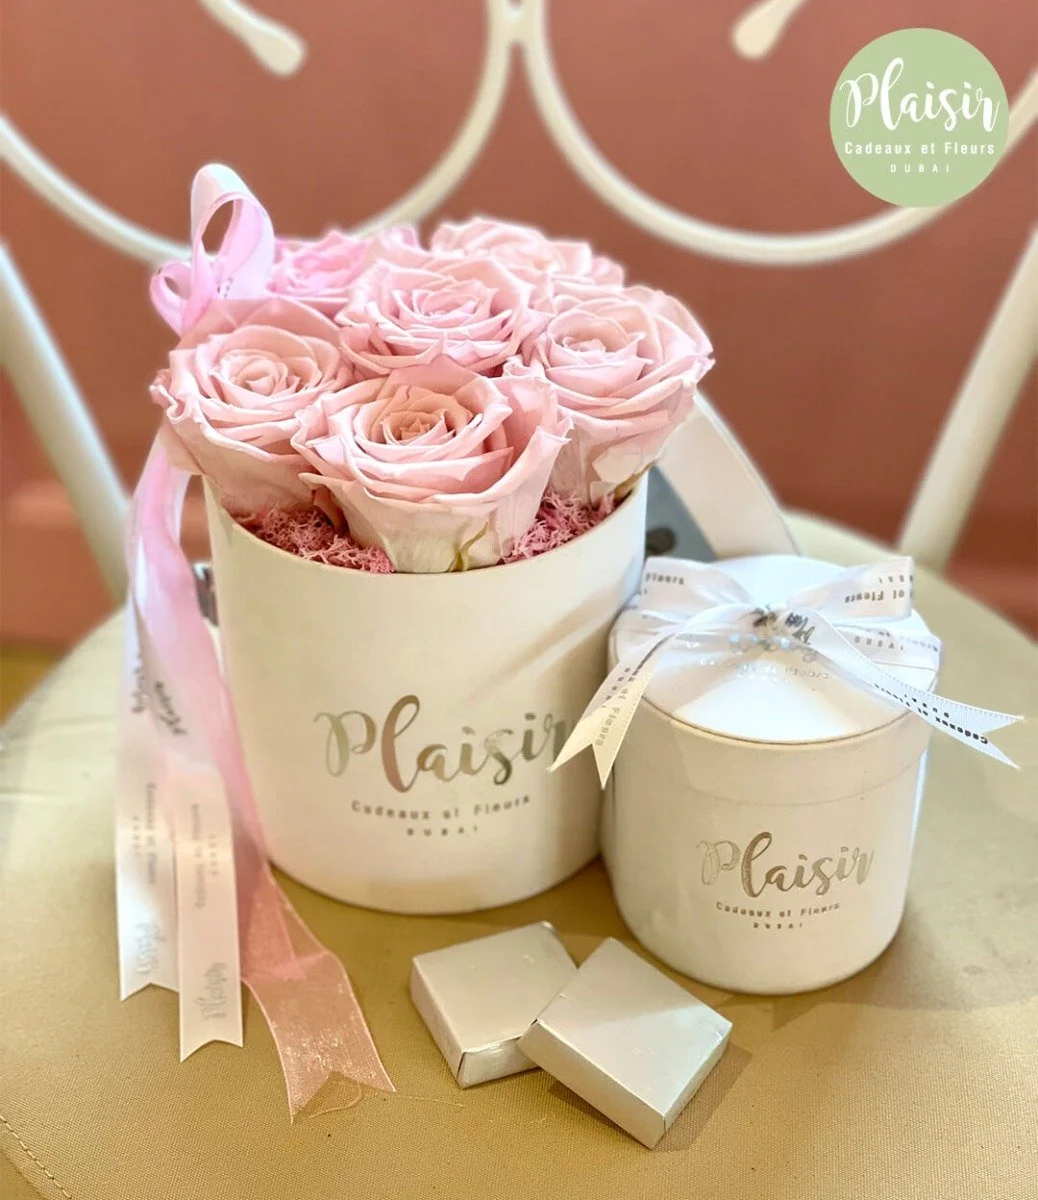 Infinity Cylinder with Pink Roses and Patchi Chocolates in White Box by Plaisir